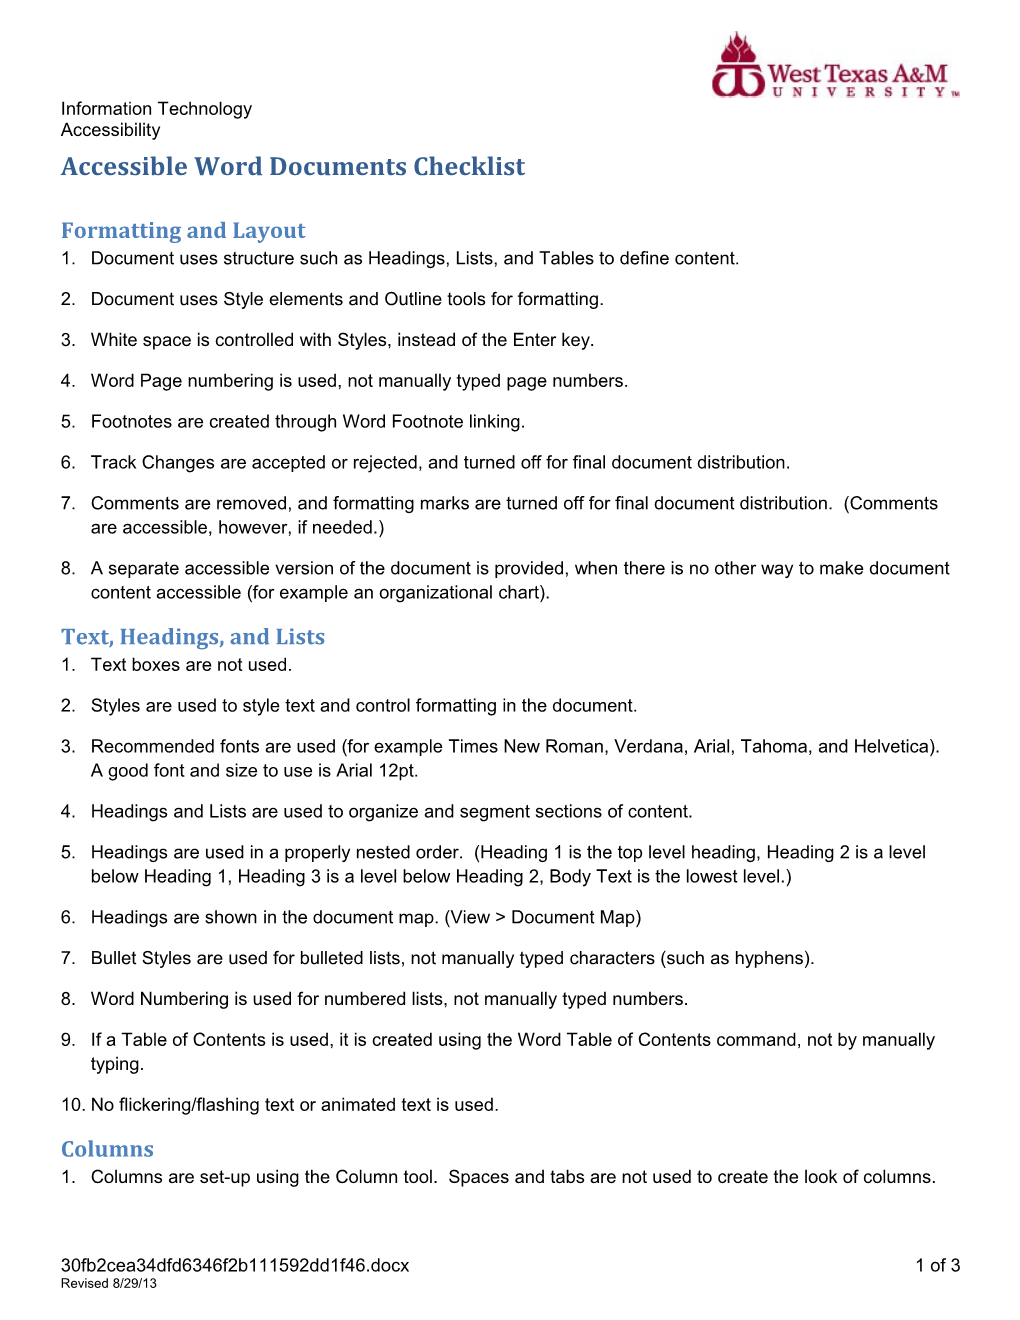 Accessible Word Documents Checklist